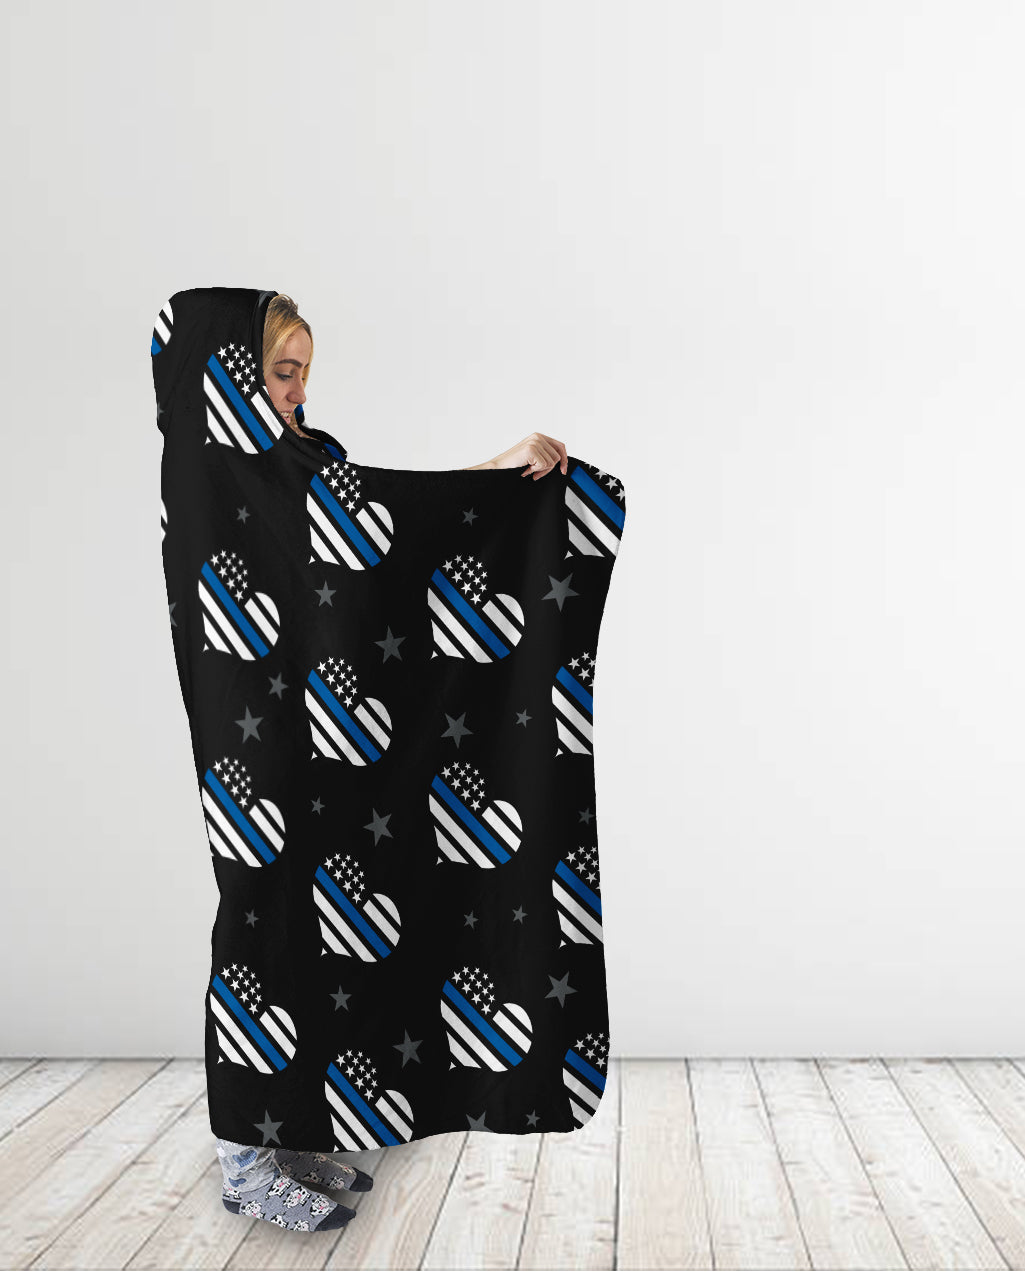 Thin Blue Line Hearts Hooded Blanket